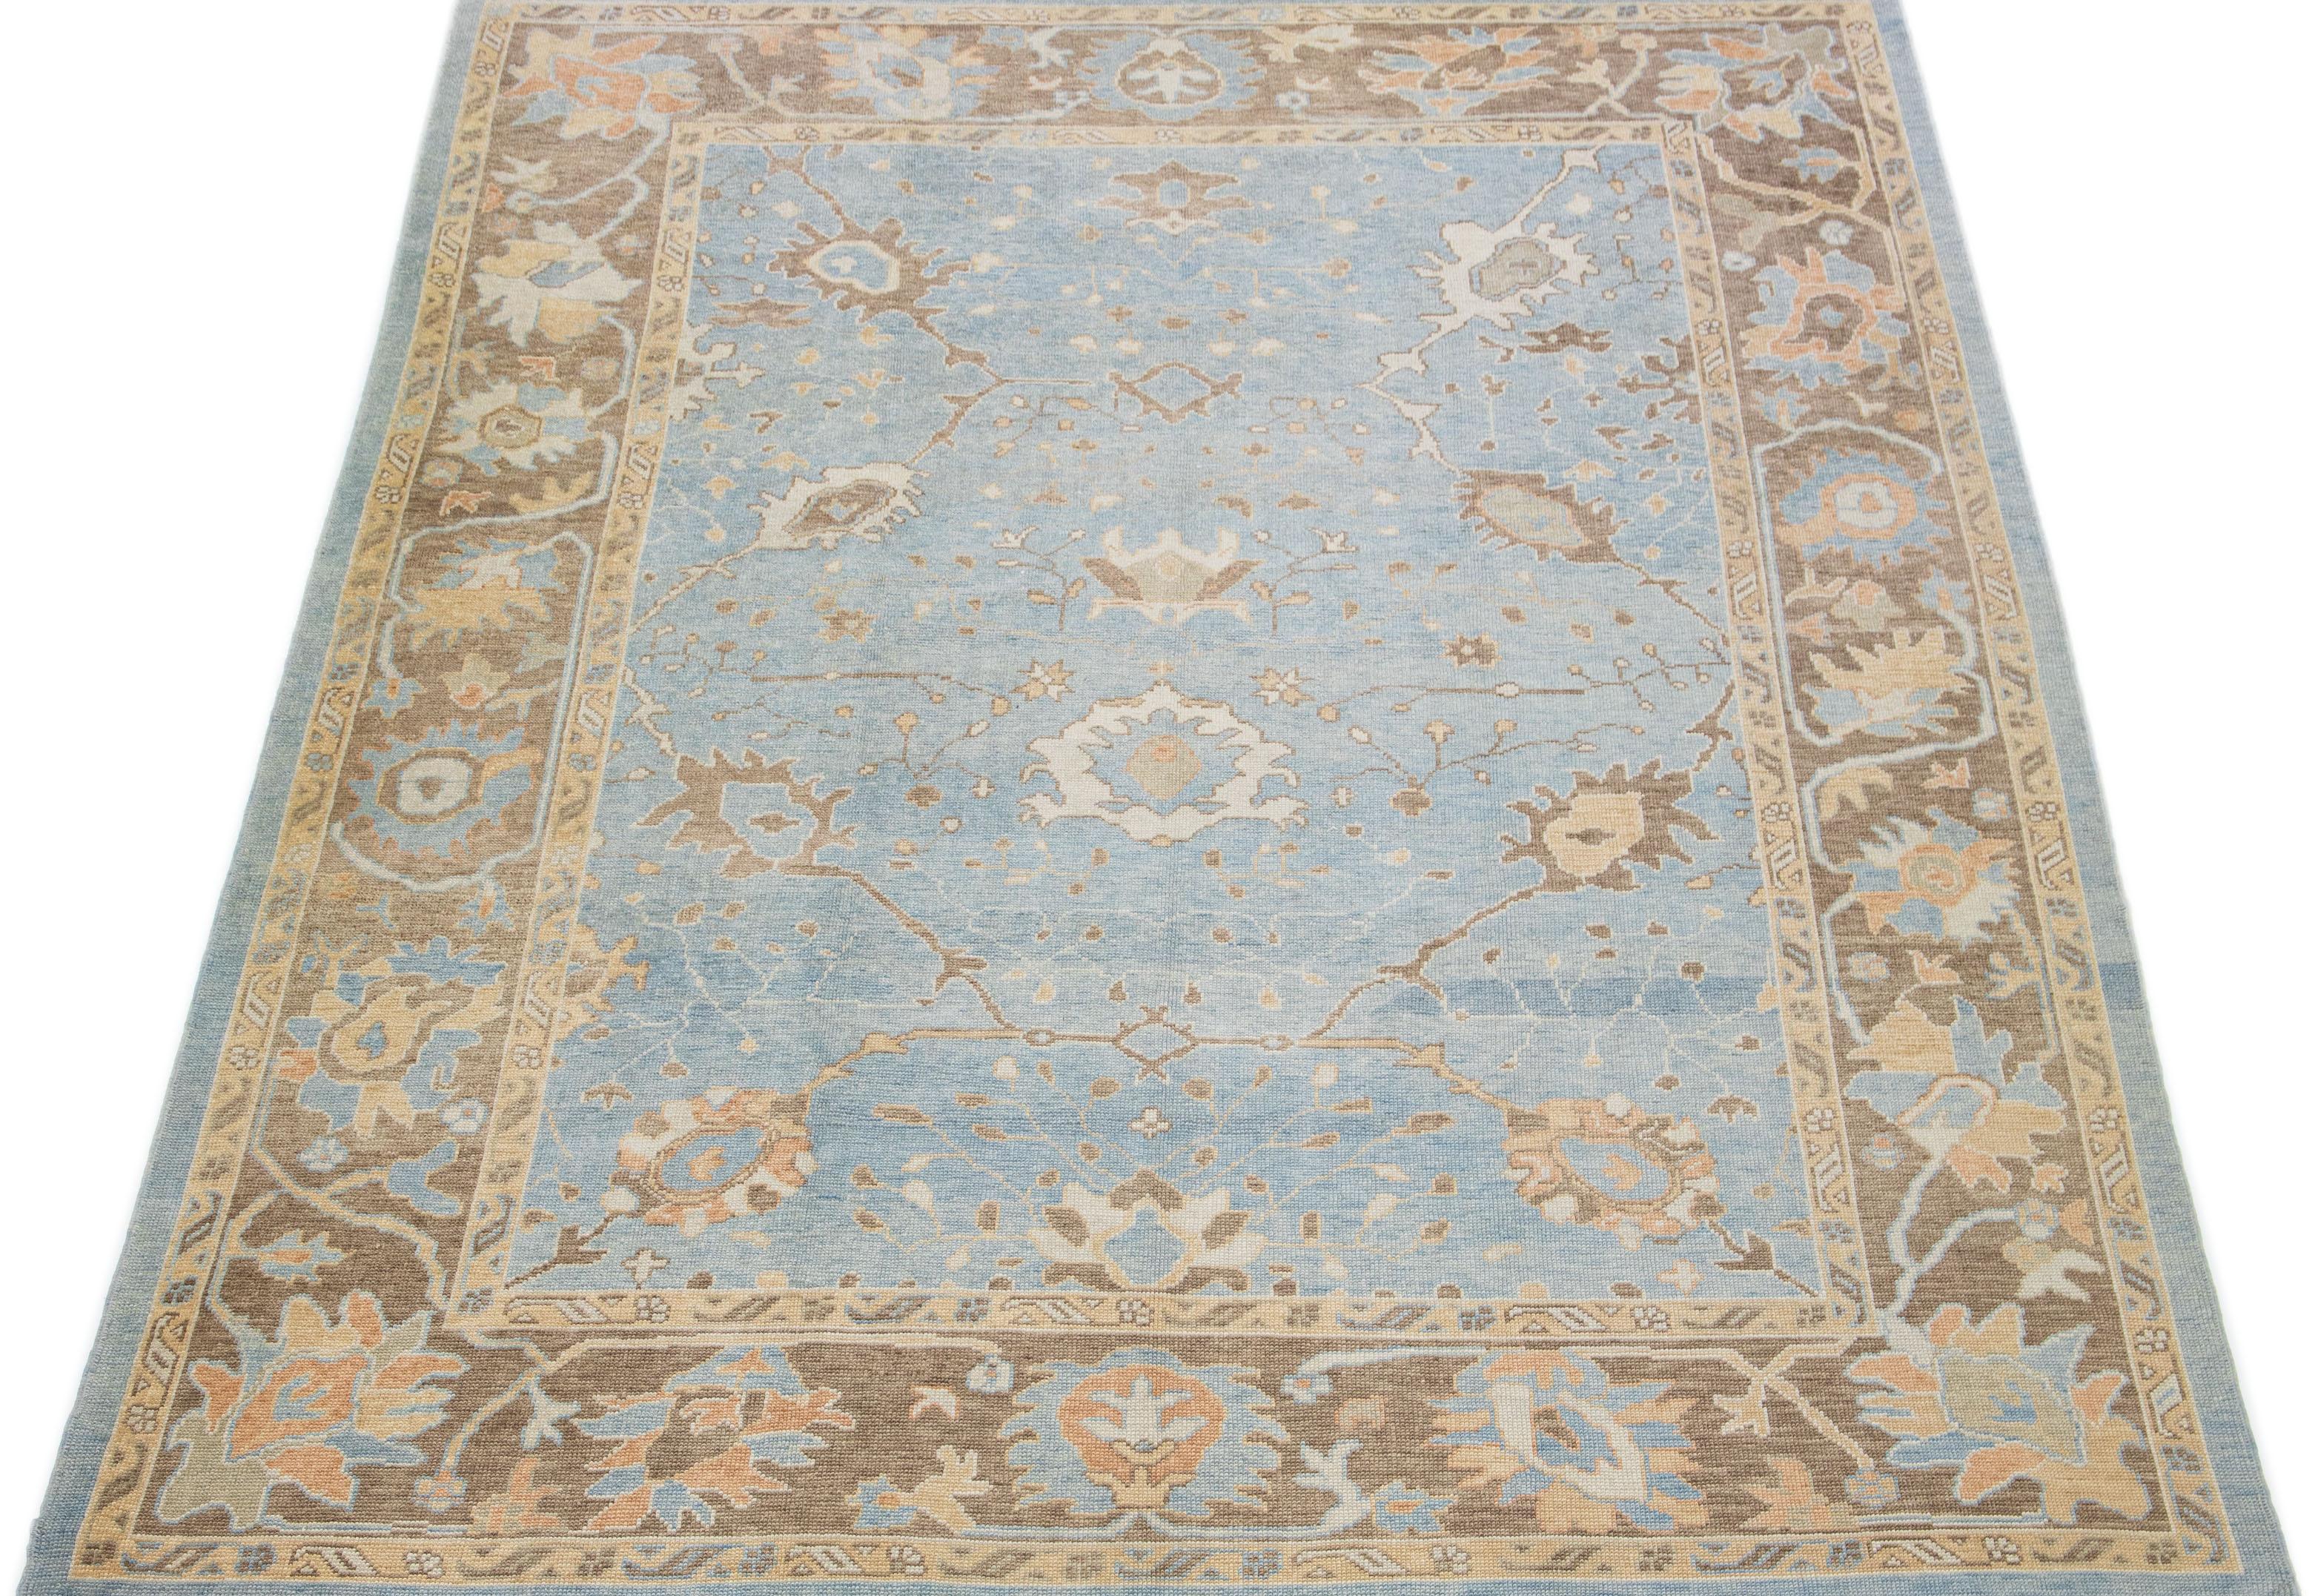 This woolen rug from Oushak, Turkey, boasts a modern aesthetic, featuring a delightful floral pattern in shades of beige on a beautiful blue canvas. Intricately and expertly crafted by hand, the rug is punctuated with charming accents of cream and